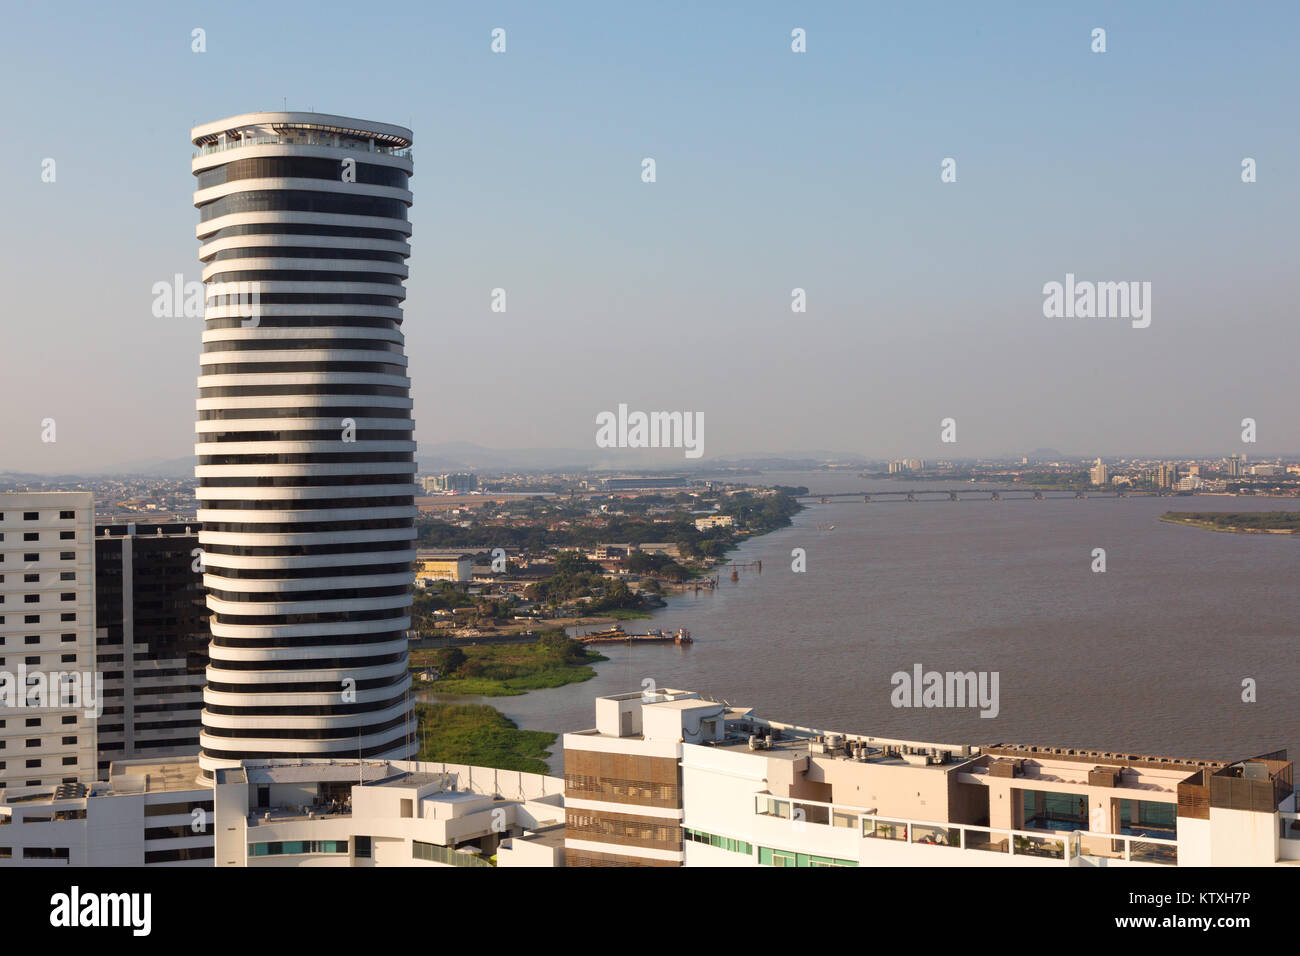 The Point building, a modern skyscraper, and the Guayas river, Guayaquil, Ecuador, South America Stock Photo